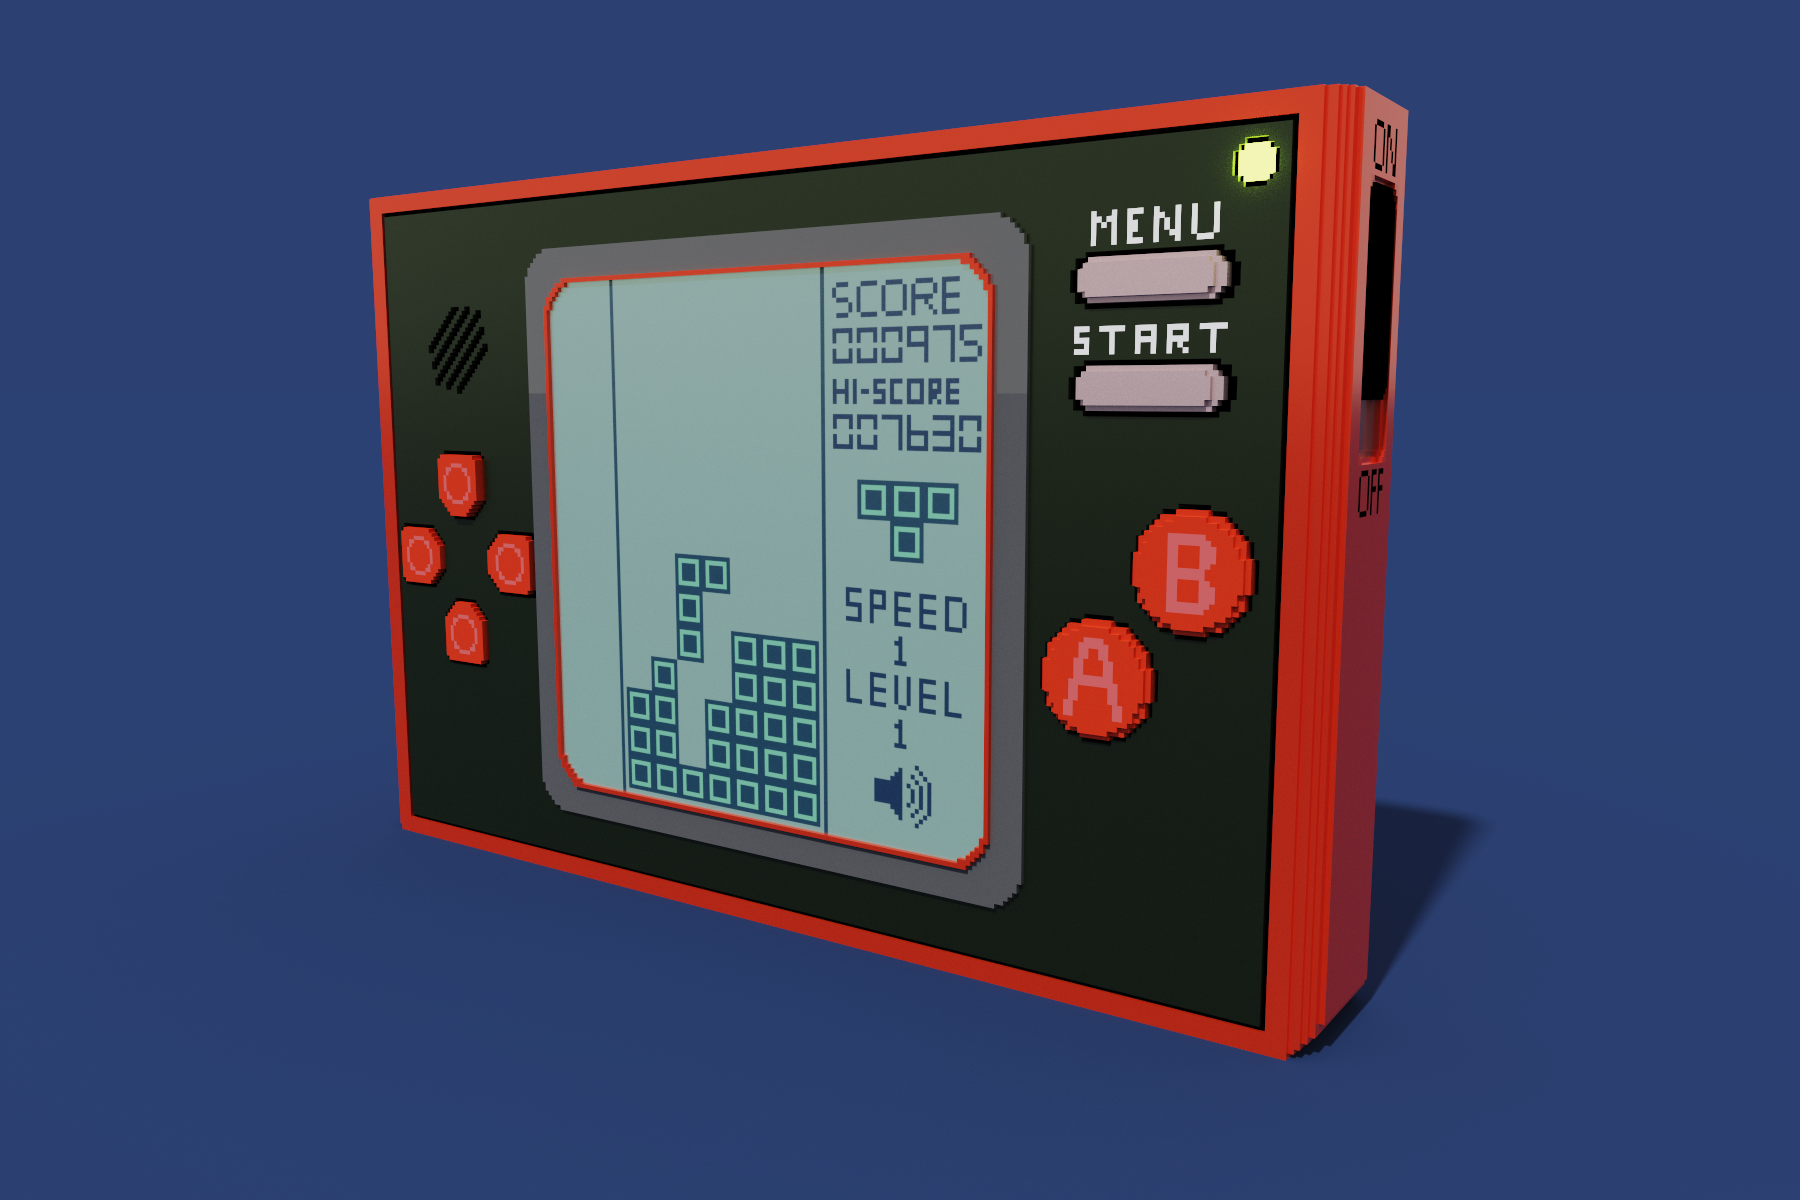 Game Watch Tetris Consoles Video Games MagicaVoxel Voxels Simple Background Digital Art 1800x1200